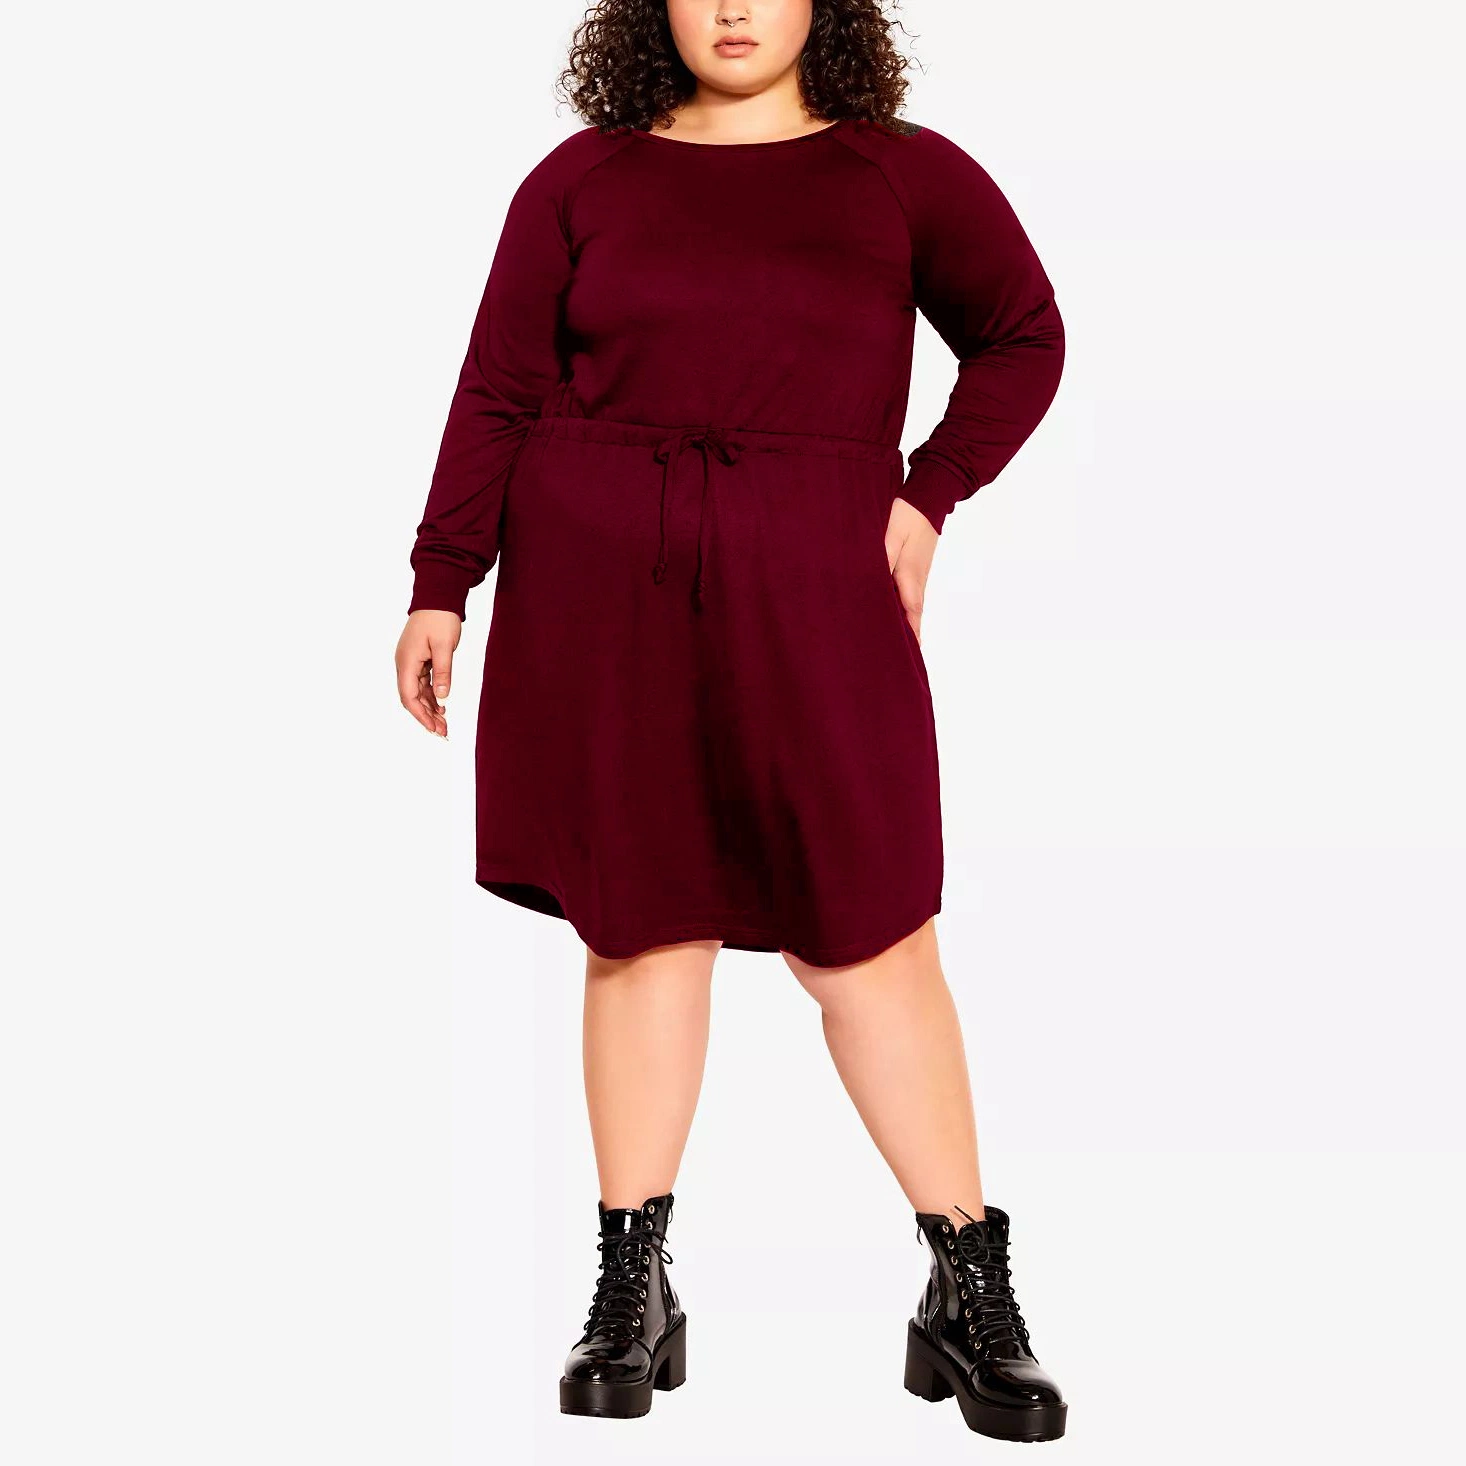 Plus Size Clothing Lady Hoodie Sweater Winter Dresses Simple Elegant Casual Dress for Women